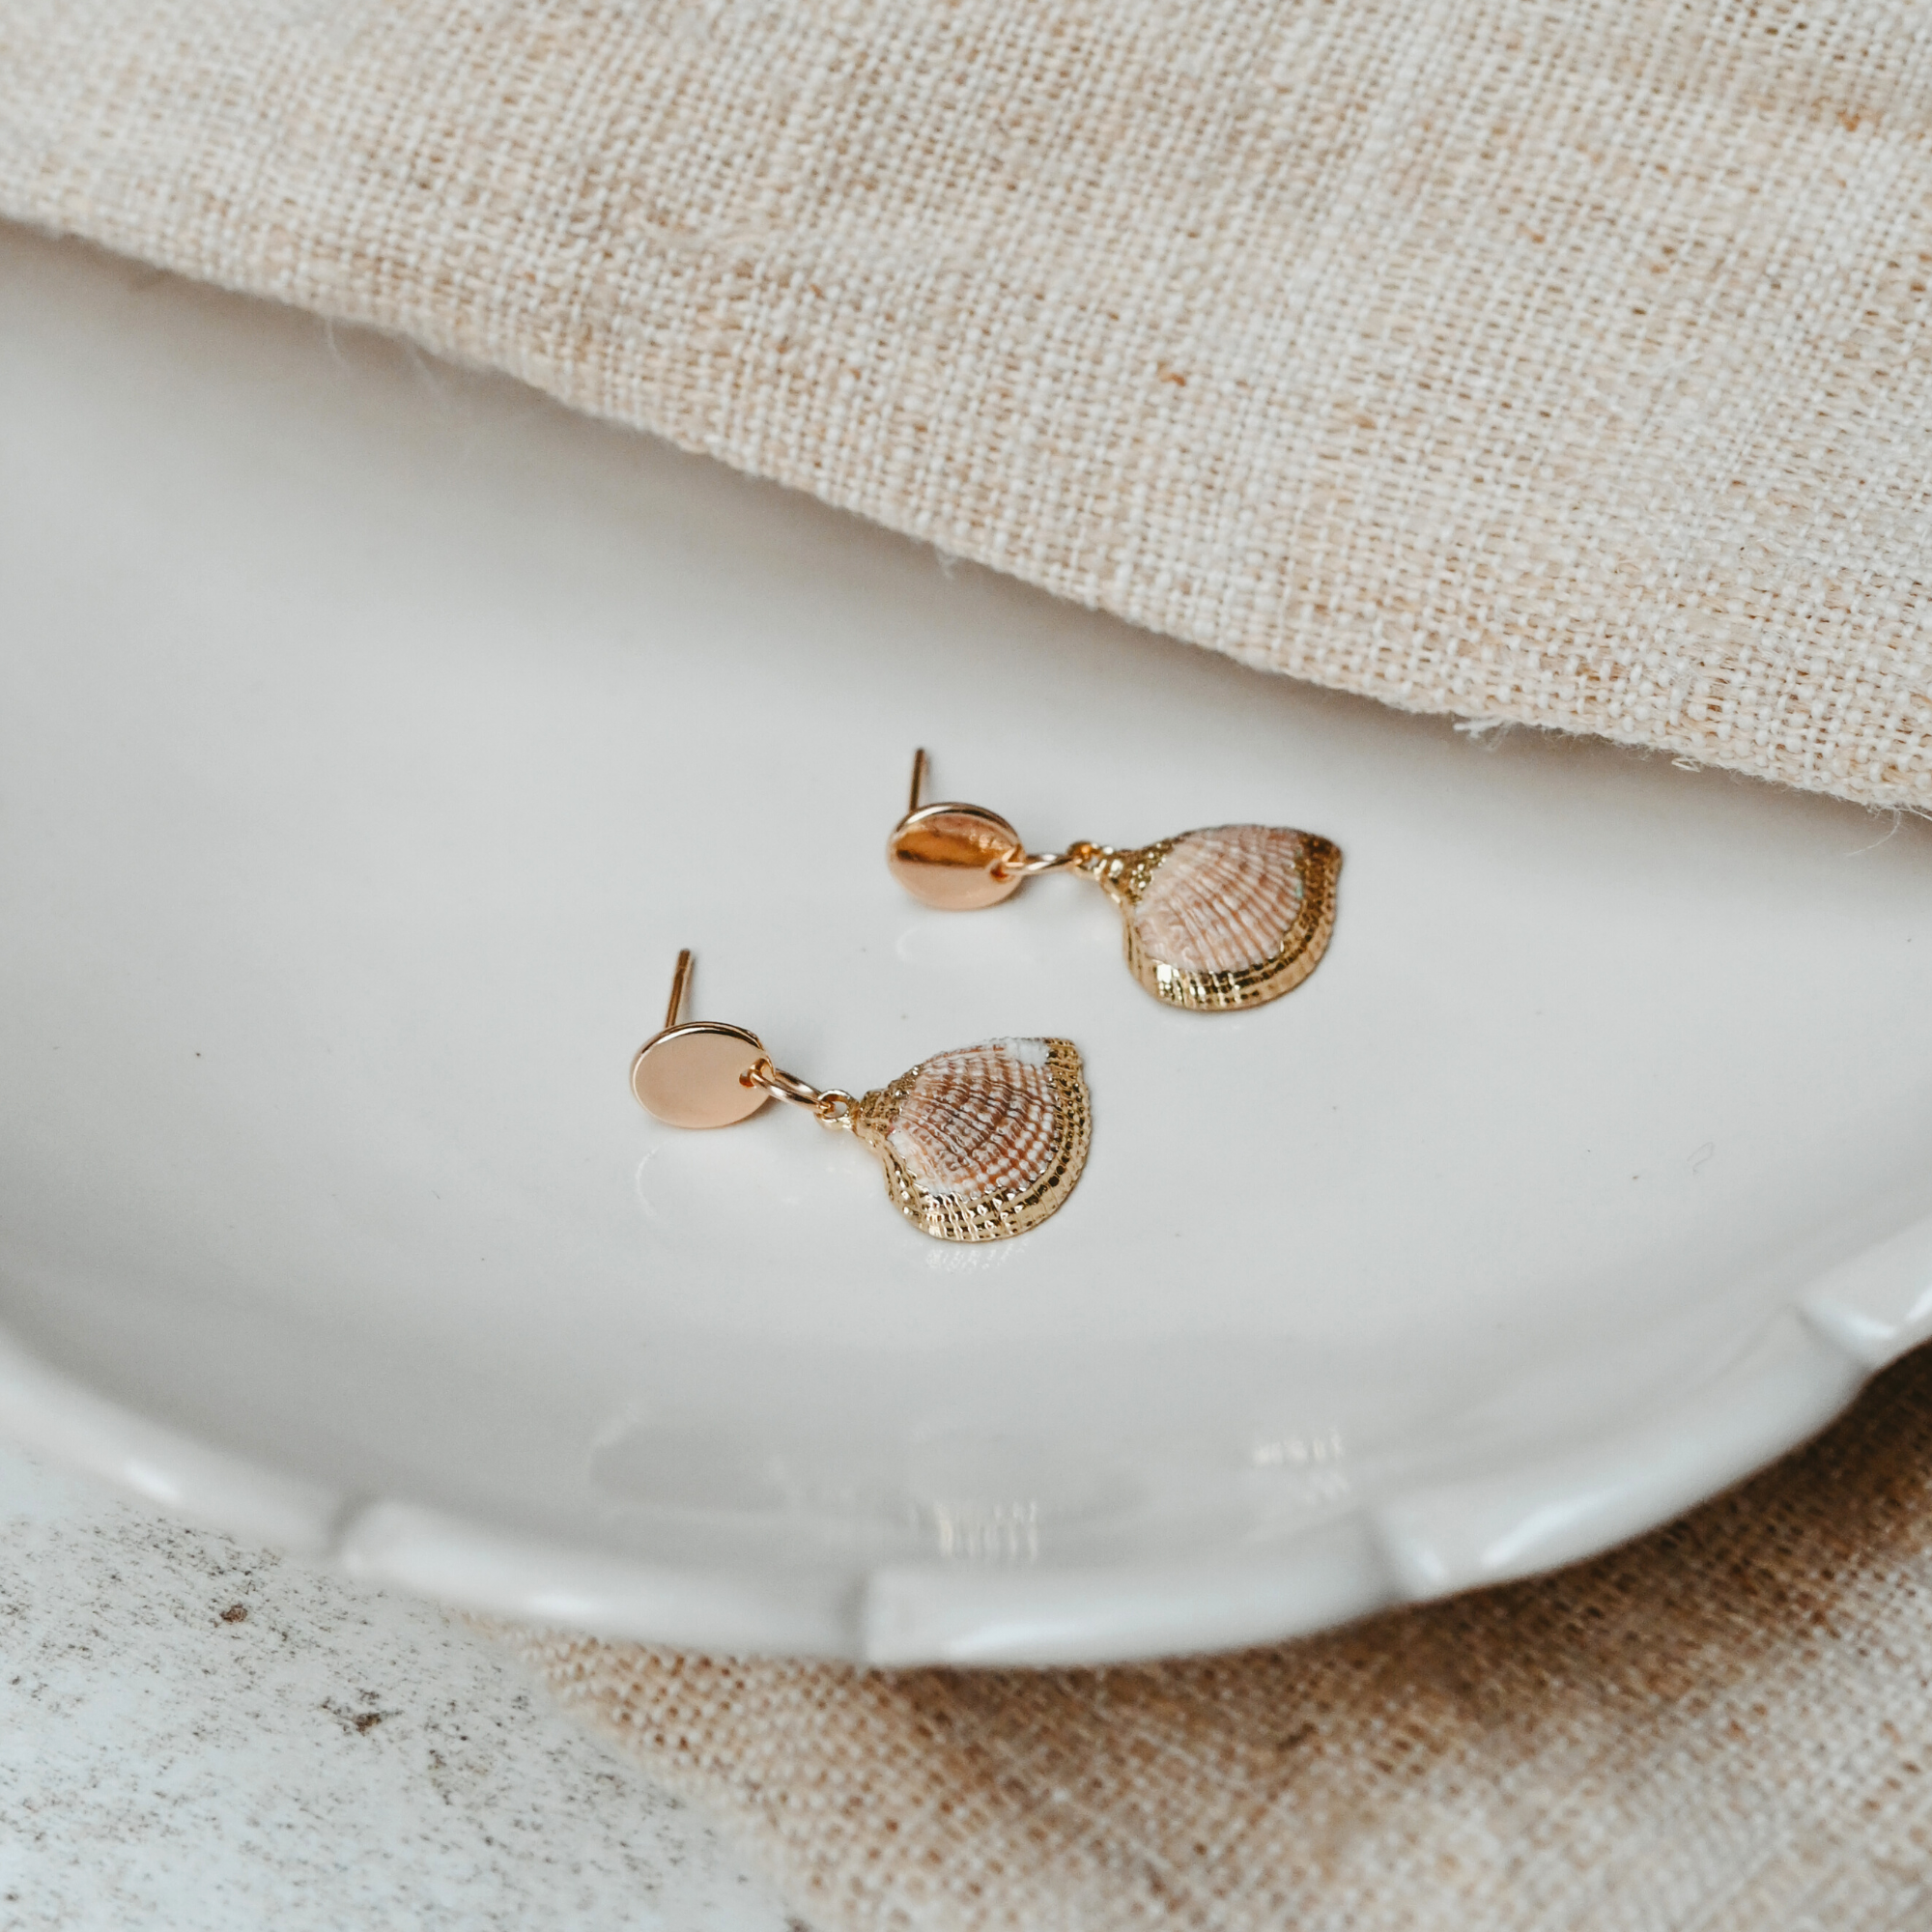 Cosmos Studio by Botanique Workshop natural and golden shell earrings